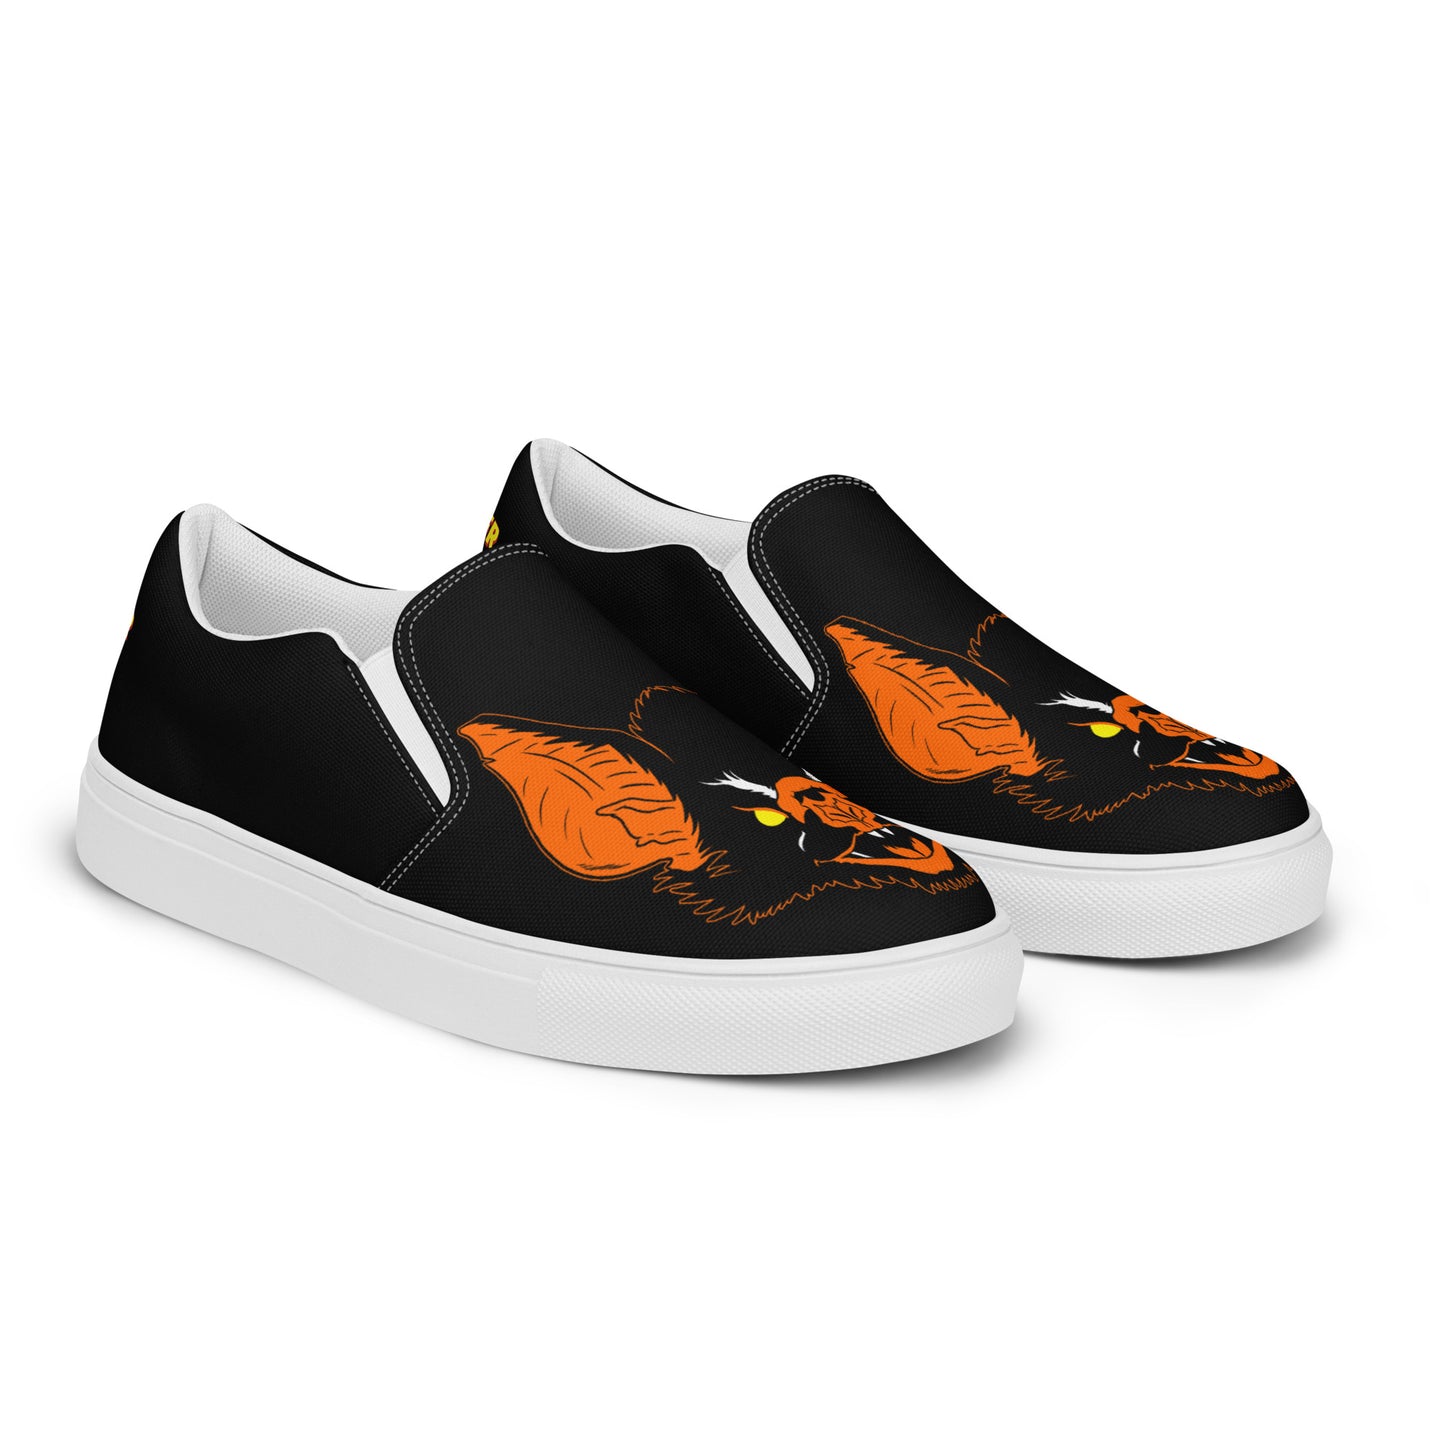 All Hallow's Slip-on Canvas Shoes